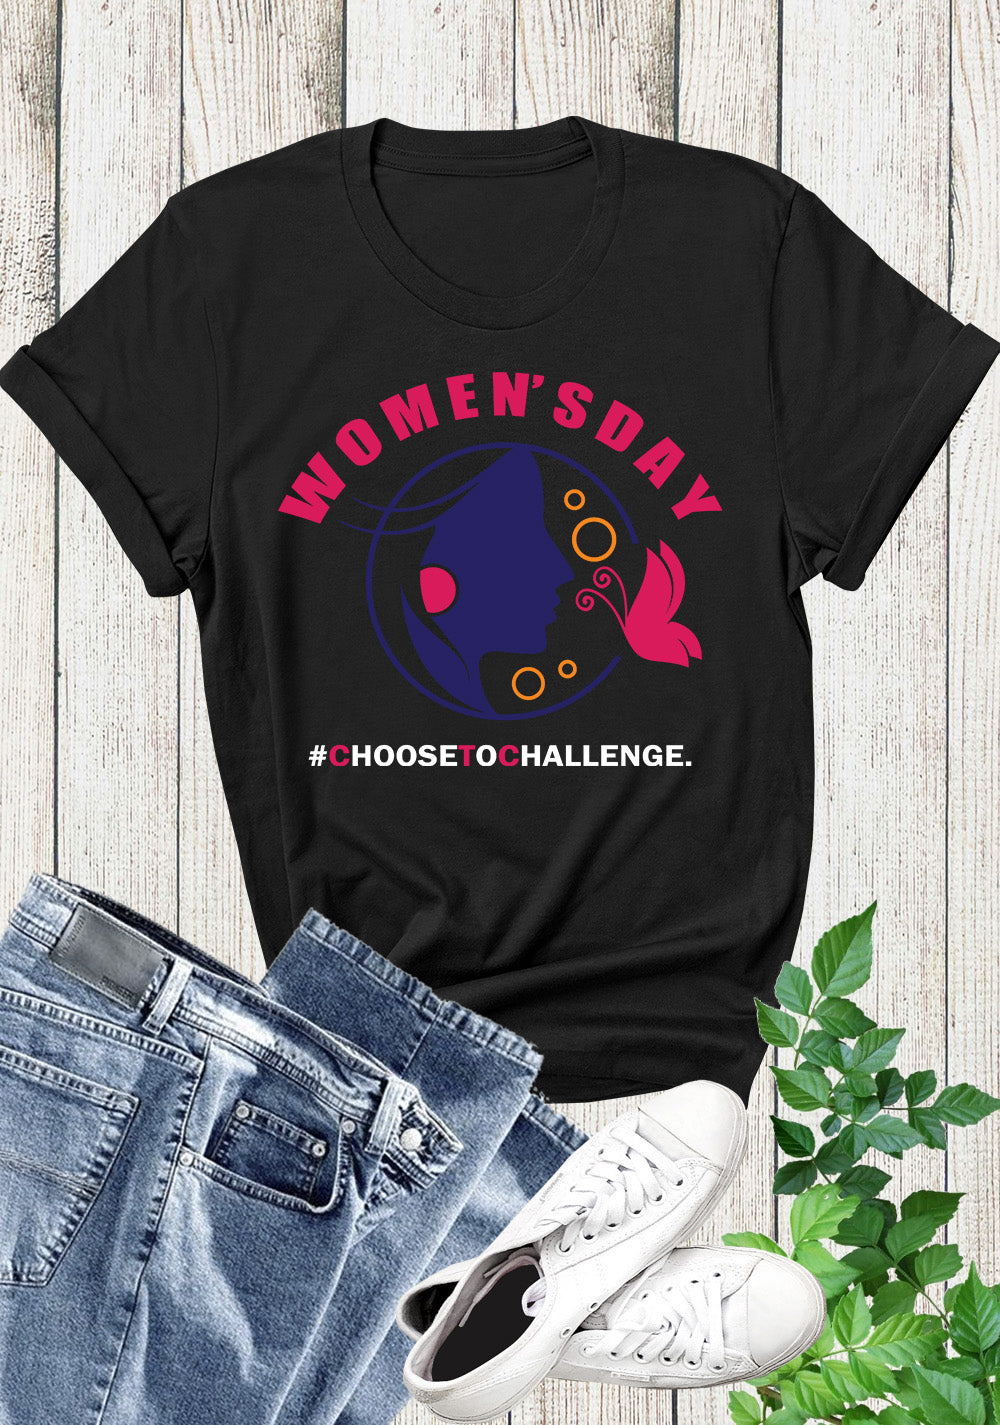 Choose To challenge Womens Day T Shirt